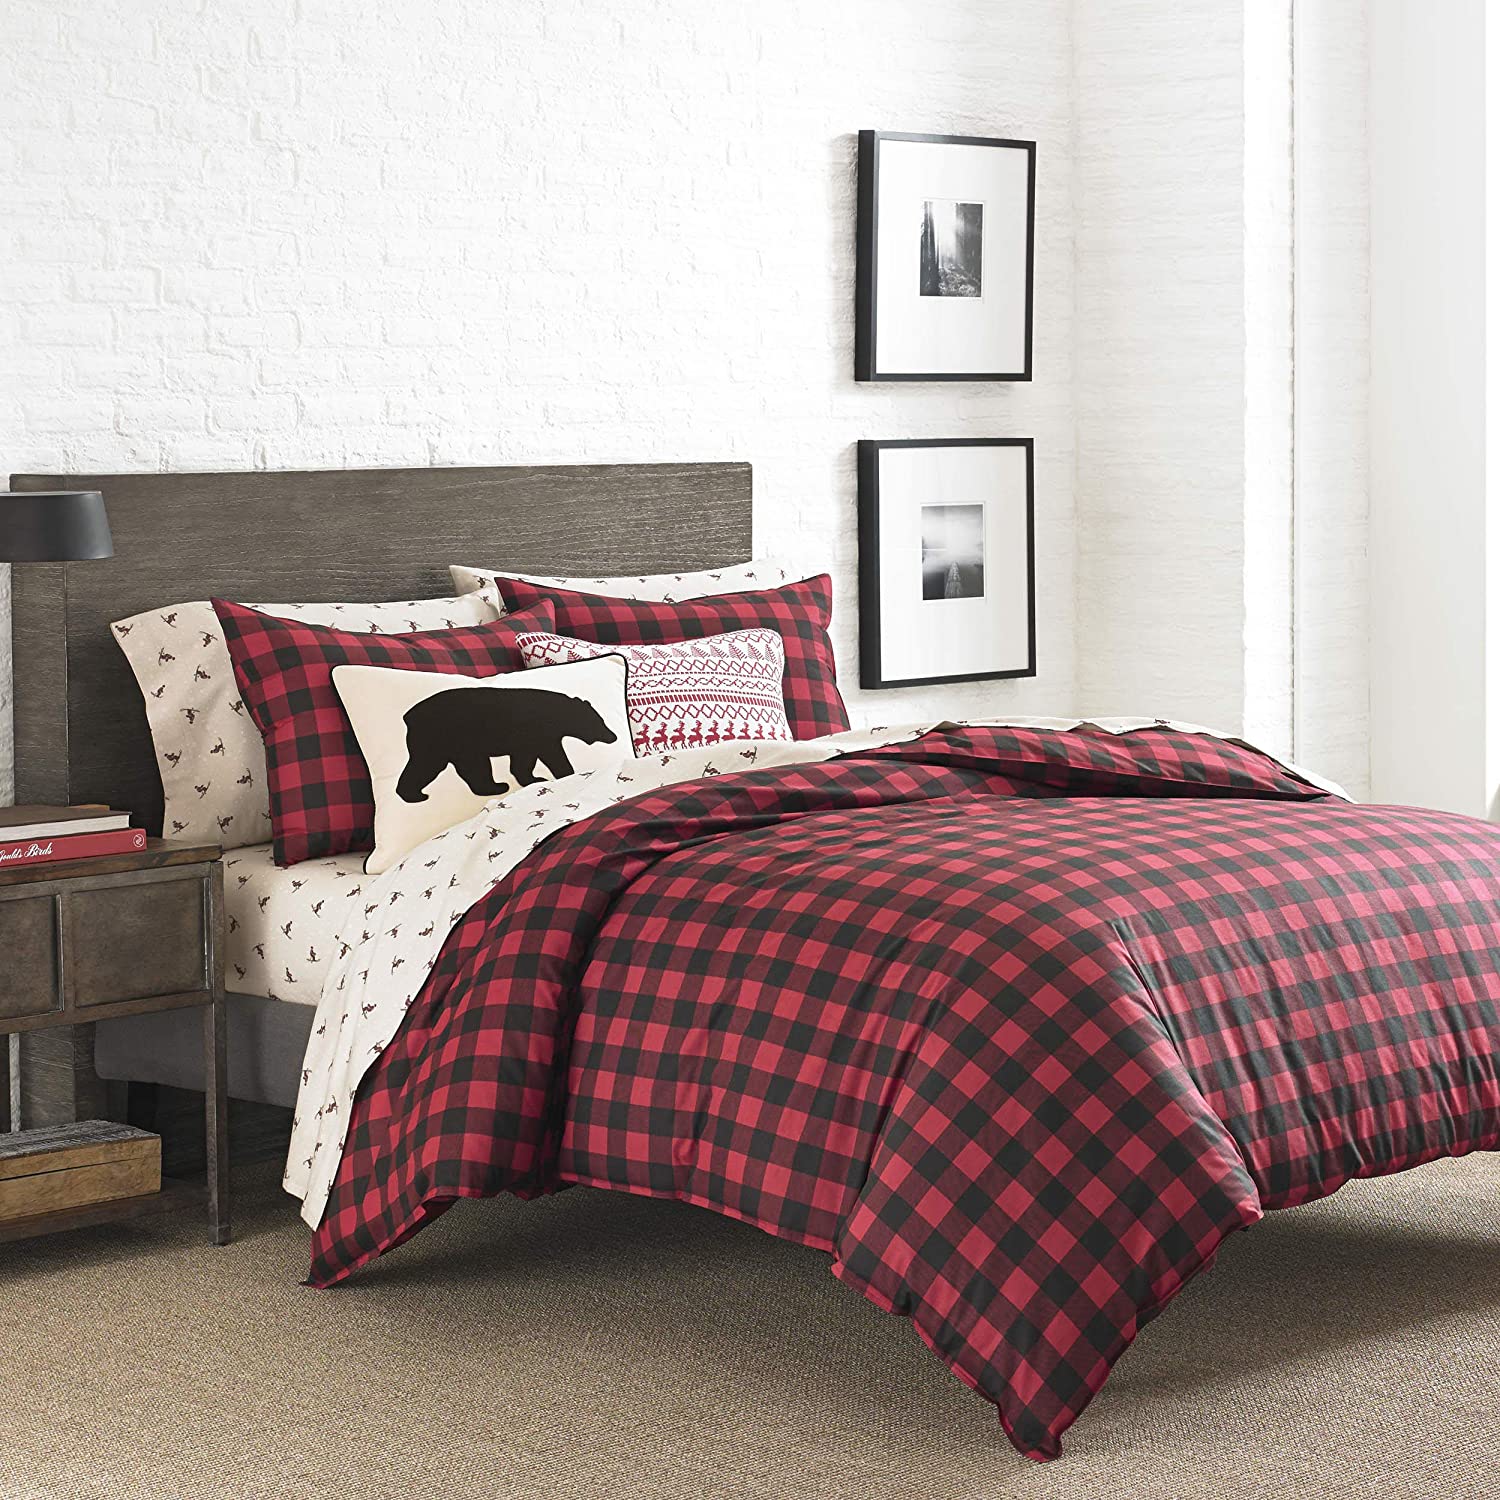 Eddie Bauer Plaid to Print Reversible Alder Collection 3-Piece Bedding Set Charcoal Full/Queen 100% Cotton Soft and Cozy Premium Quality Comforter with Matching Shams 